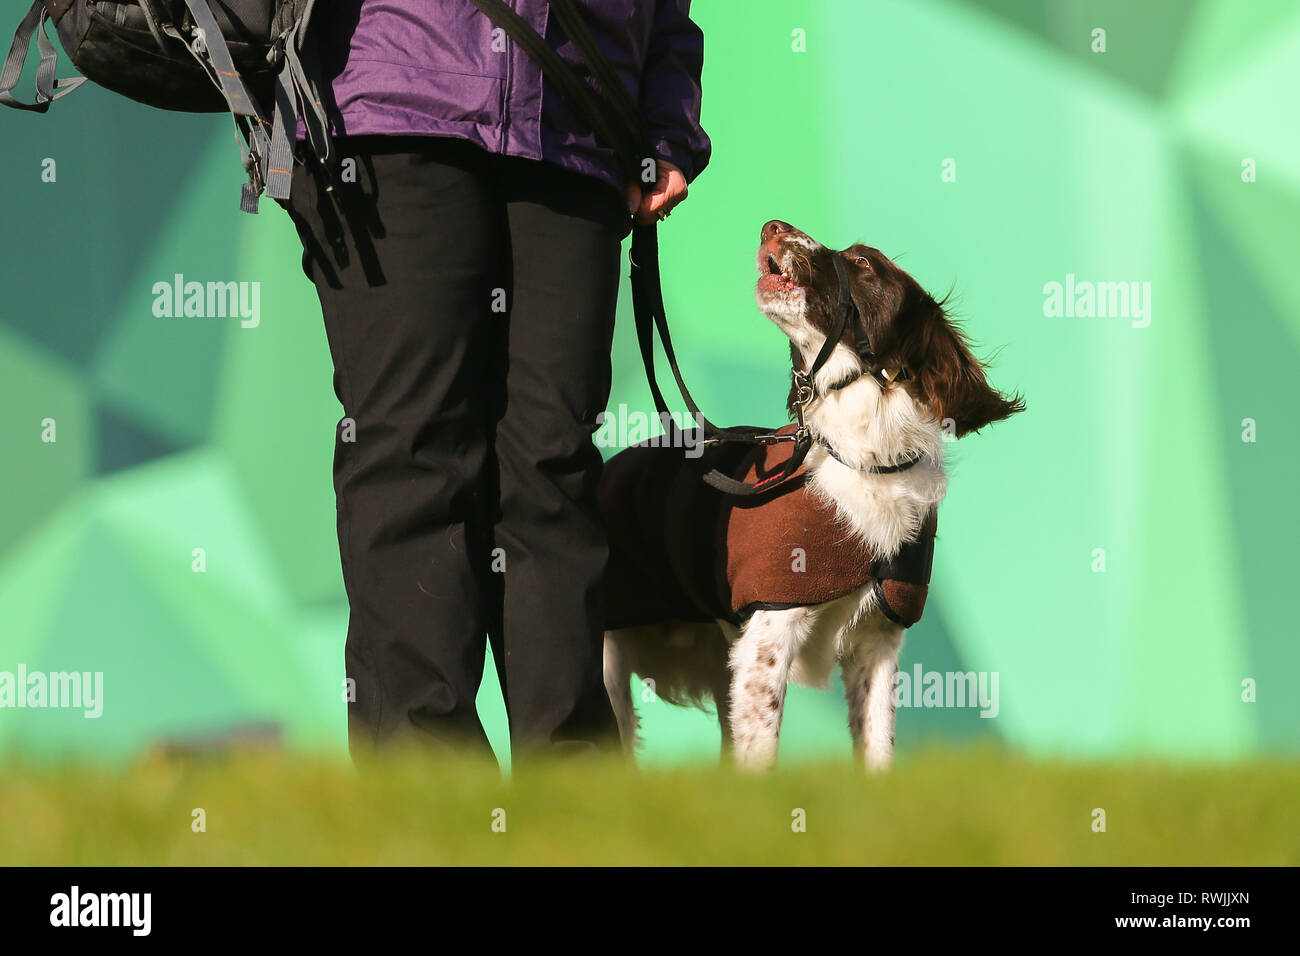 Birmingham, UK. 7th Mar, 2019. Show dogs arriving with their owners for the first day of Crufts 2019 being held at the NEC over four days. 27,000 dogs are expected to be shown over the four days, 220 different breeds, and with an estimated 165,000 dog lovers visiting. Credit: Peter Lopeman/Alamy Live News Stock Photo